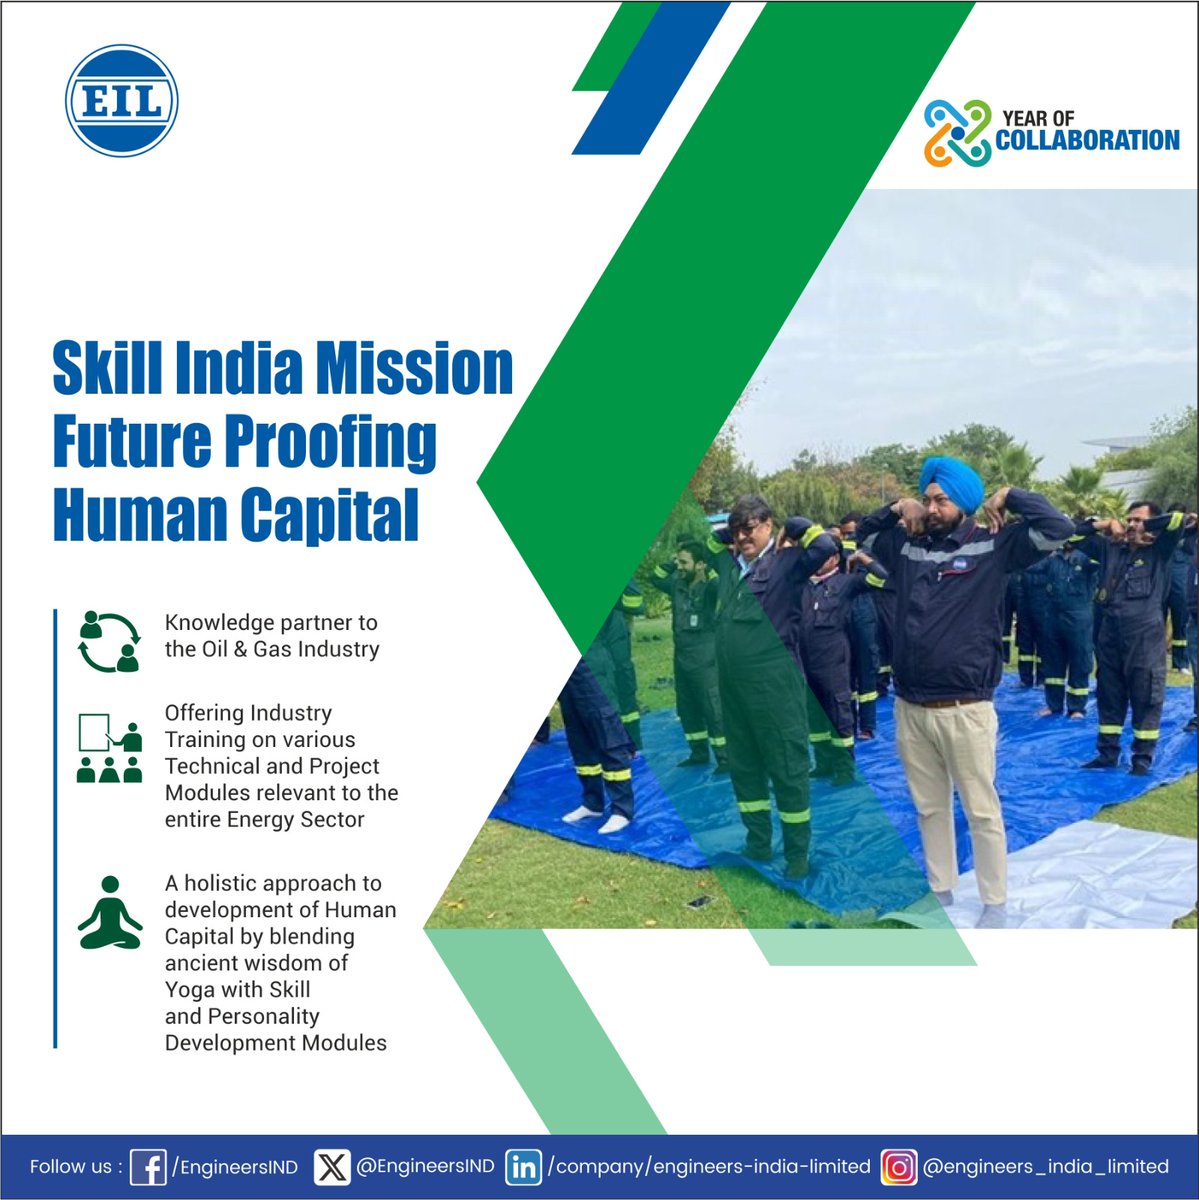 EIL is a knowledge-based organisation that is fully aligned with #GOI's #SkillIndiaMission with planned training interventions for upskilling its #HumanCapital. The Company's Training Plan takes a holistic view to not only upgrade employee skills but also use #Bharat's Ancient…